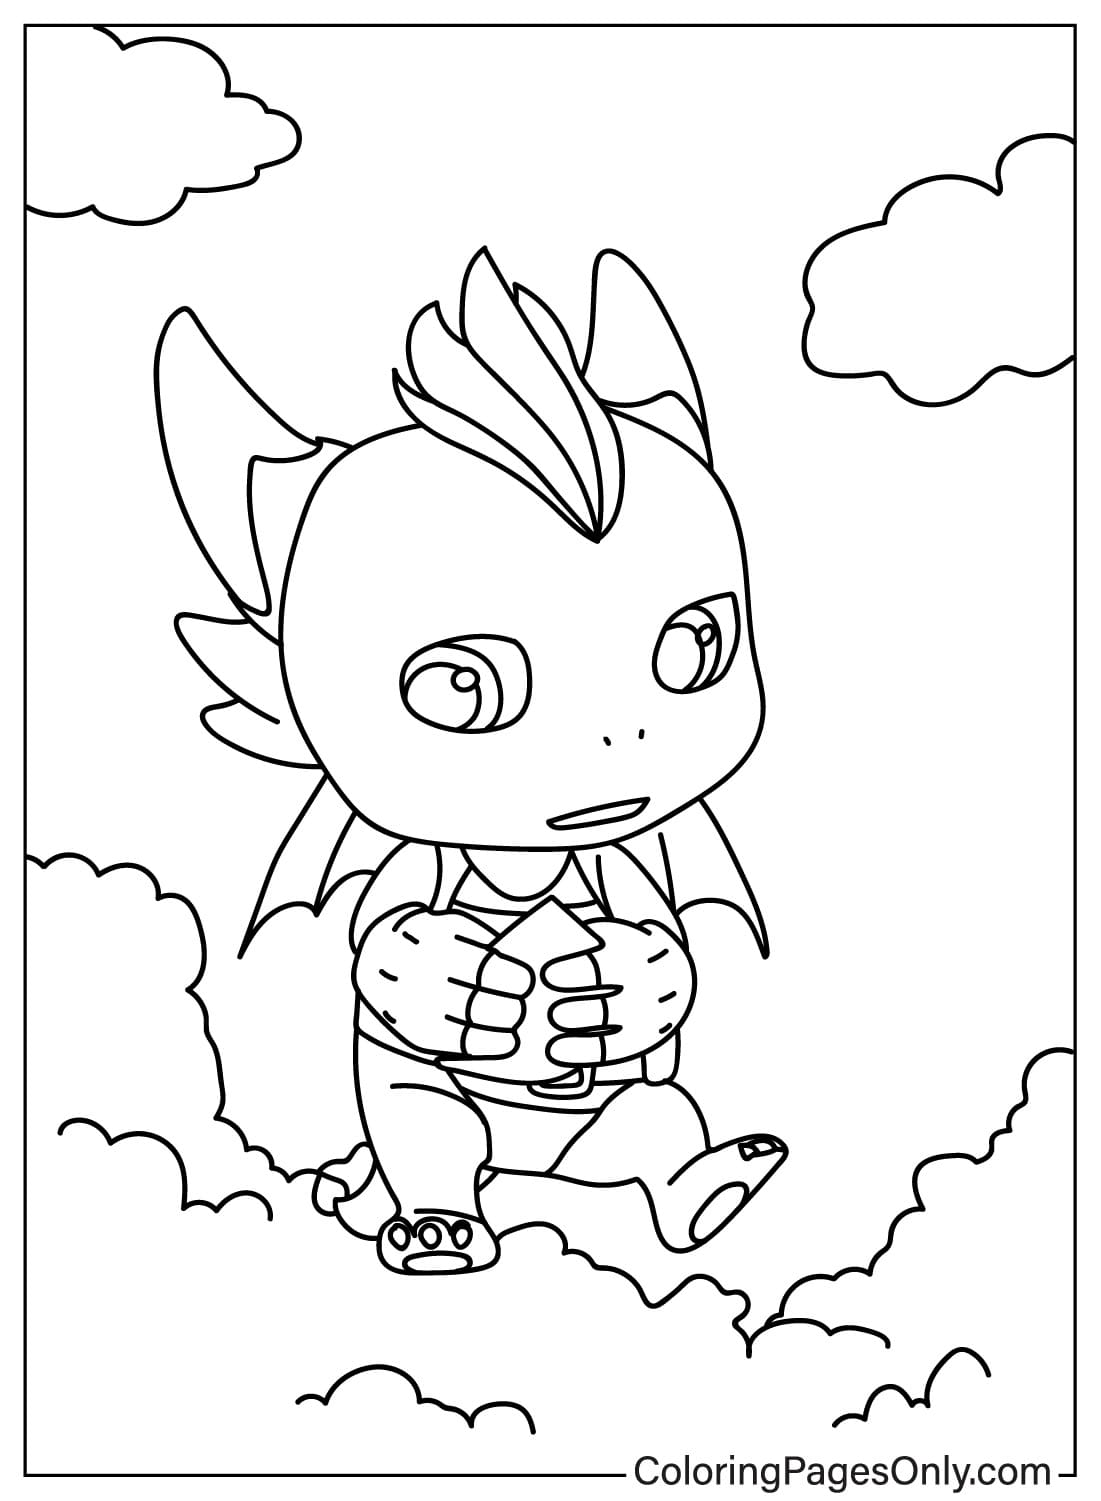 Pororo Dragon Castle Adventure Coloring Page Free from Pororo the Little Penguin